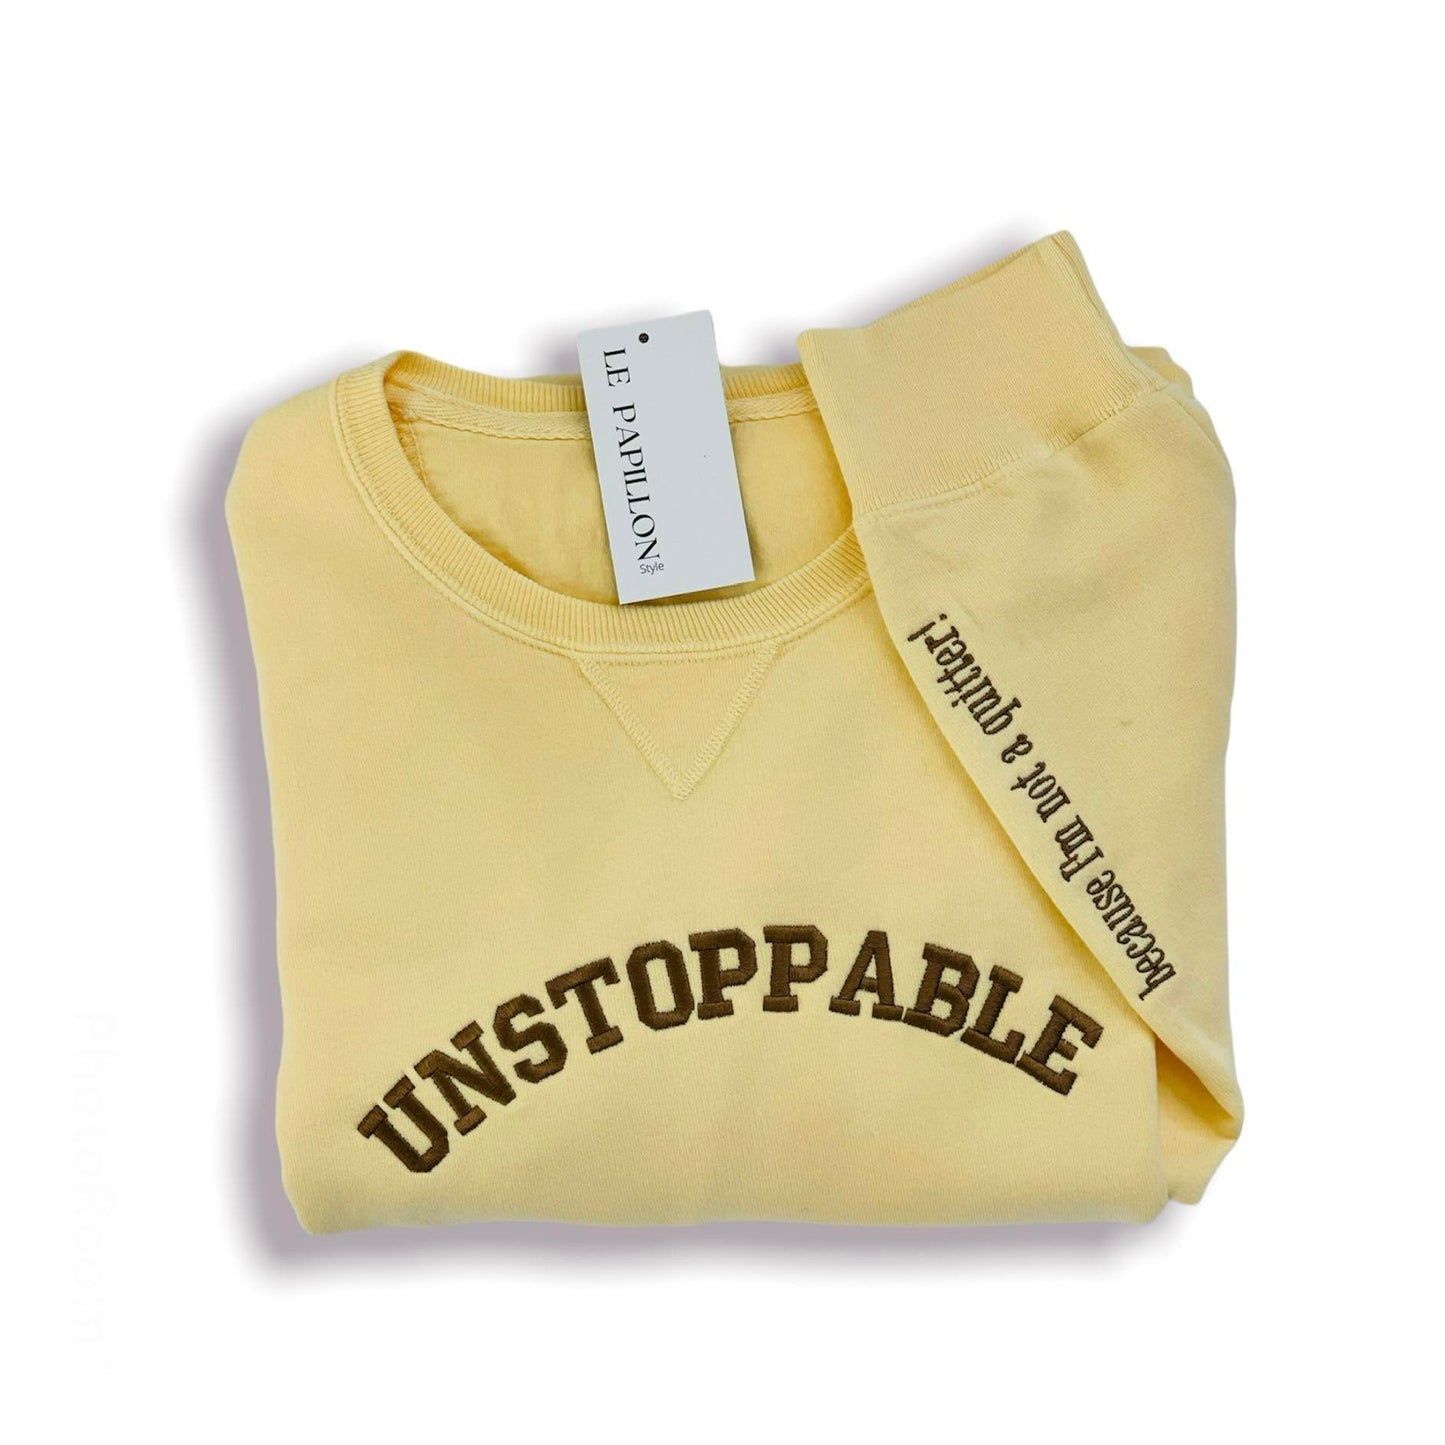 Unstoppable, because I'm not a quitter Sweatshirt